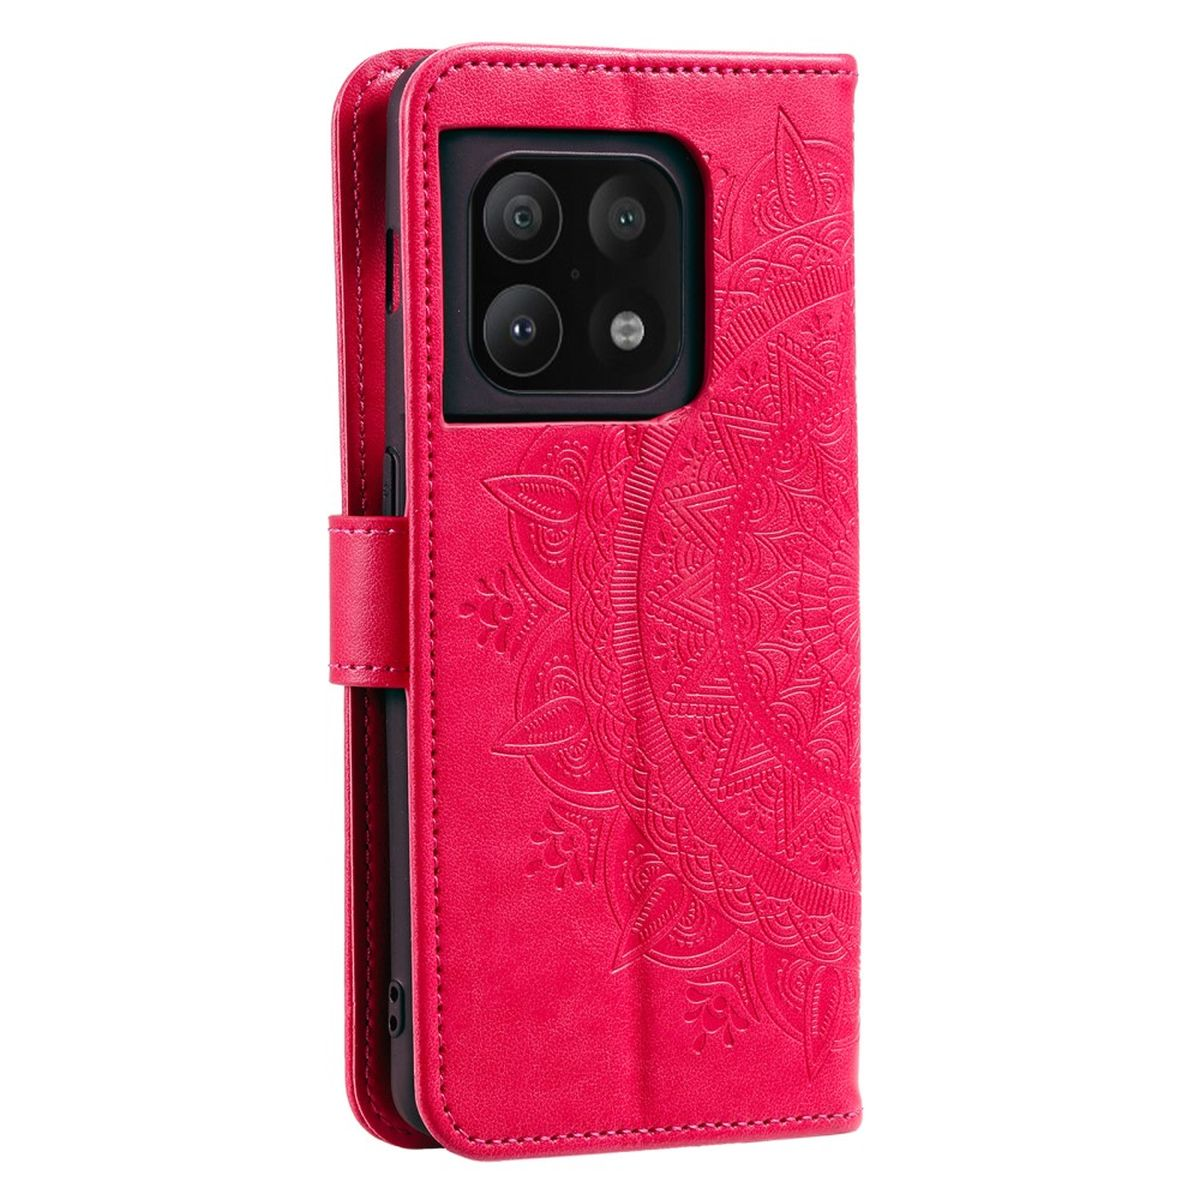 Pro Bookcover, COVERKINGZ Klapphülle OnePlus, 10 5G, Mandala Muster, mit Pink